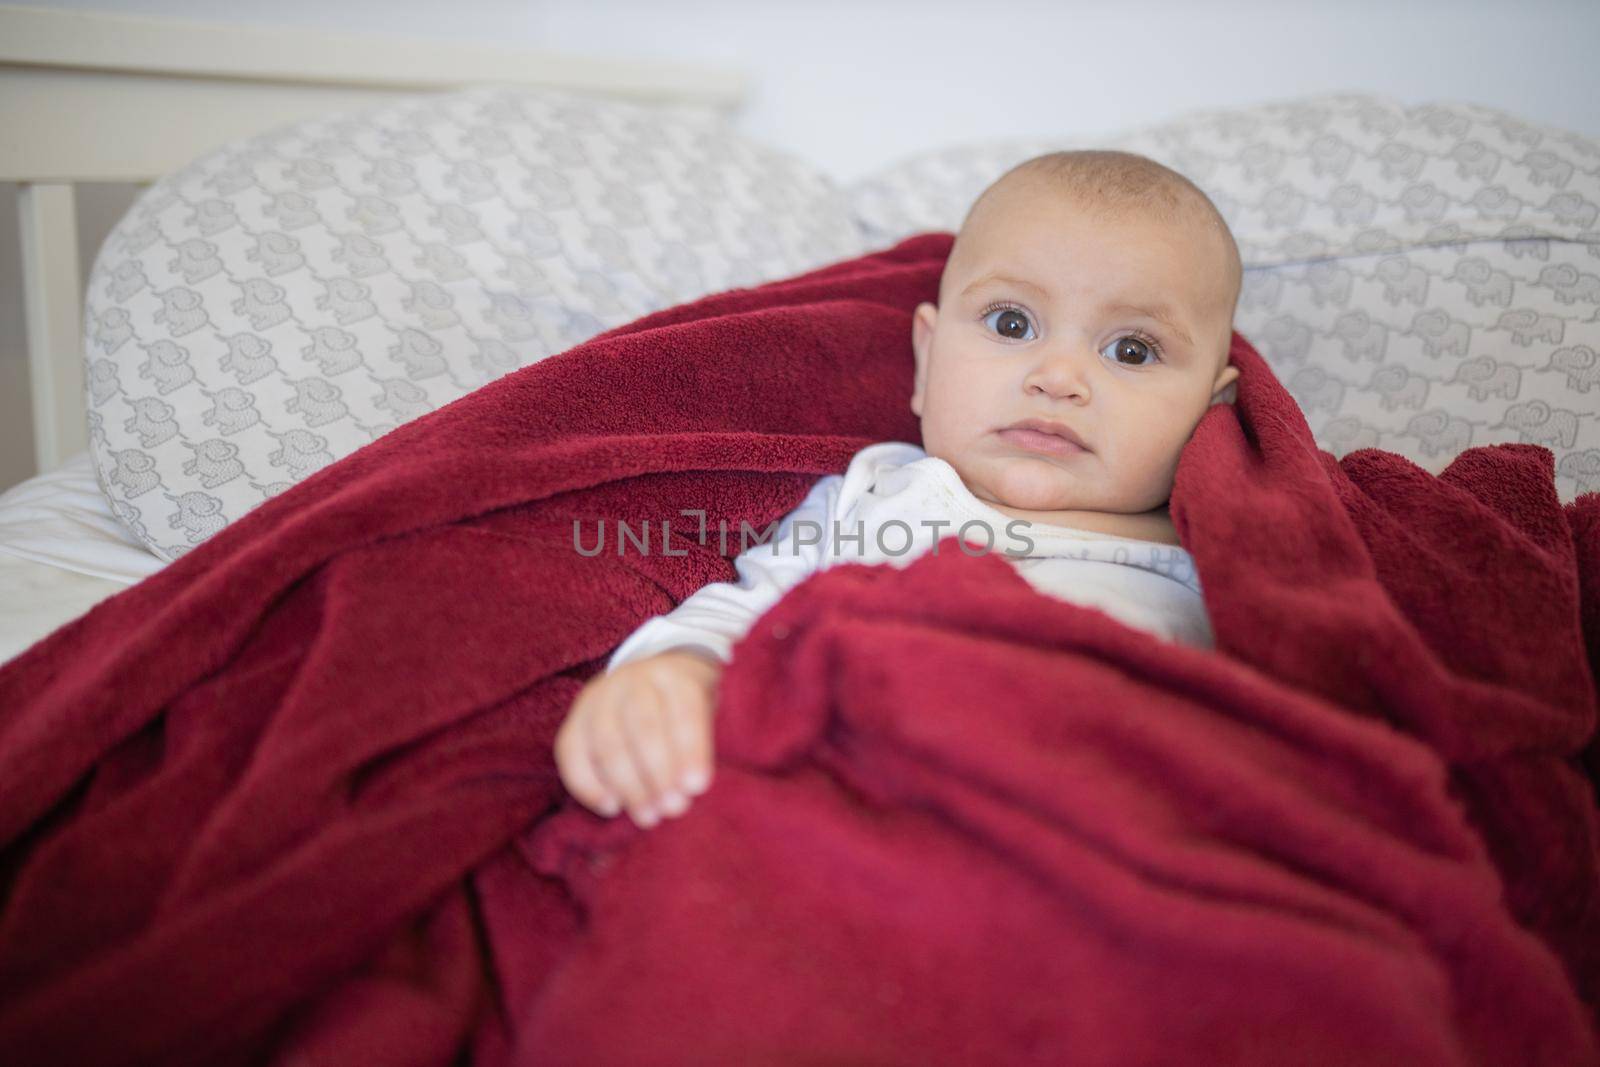 Adorable and relaxed baby covered with red blanket and lying on bed. Cute calm baby resting on pillows. Toddles and babies on beds